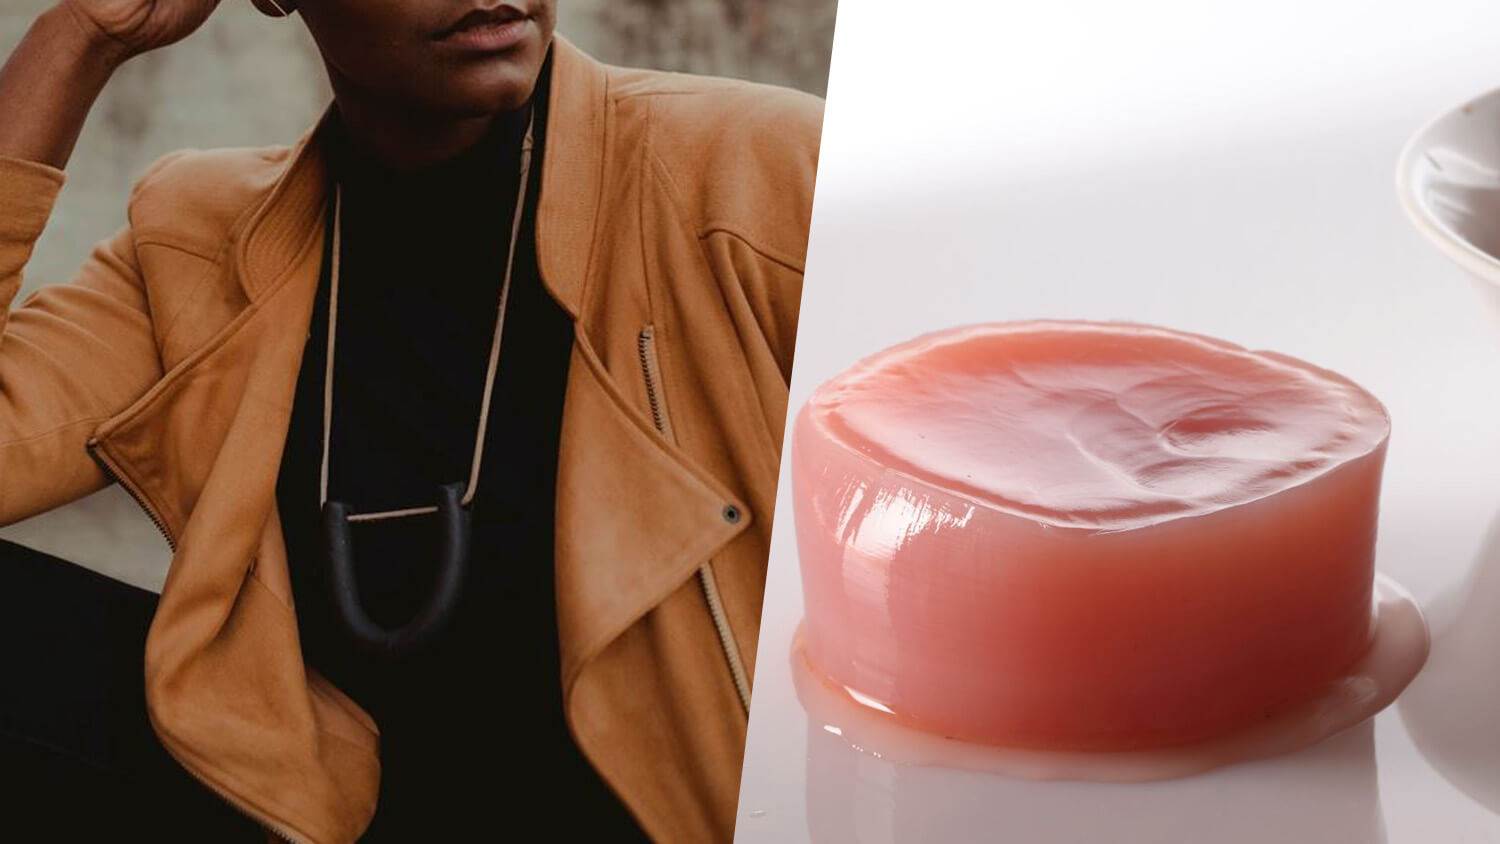 17-Year-Old Accepted to London College of Fashion With Vegan Kombucha SCOBY Leather Design